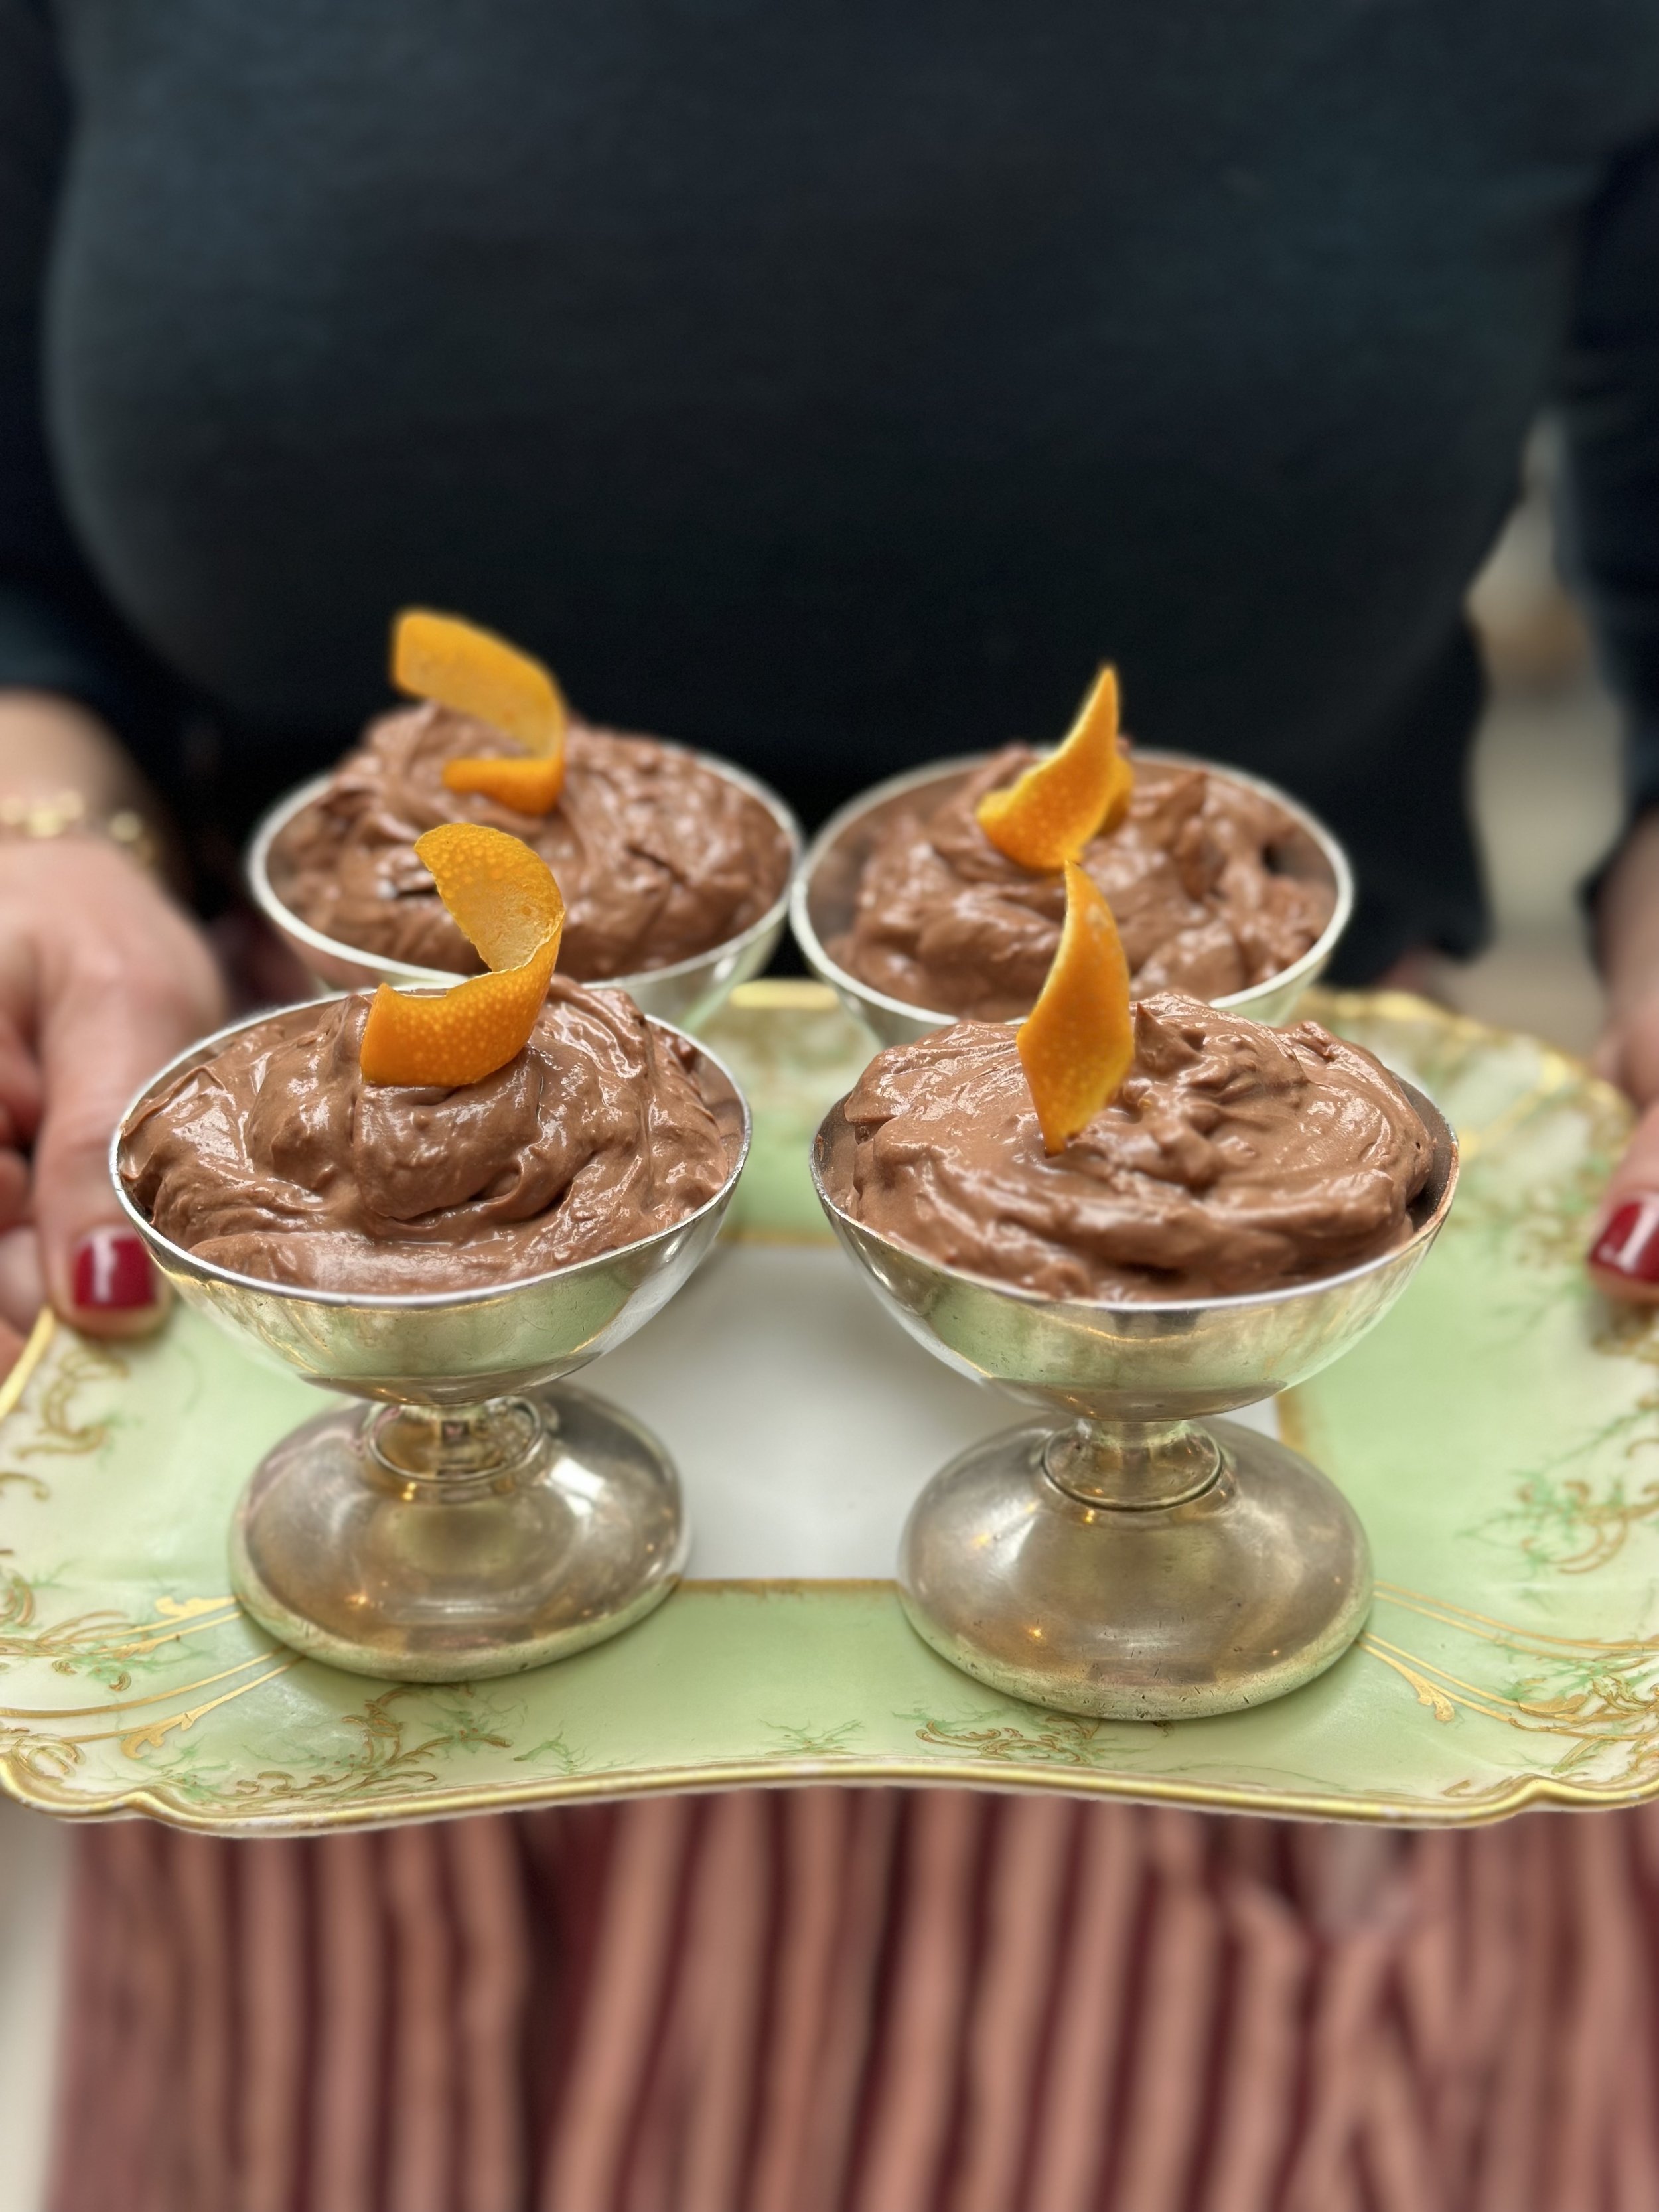 chocolate and clementine mousse clodagh mckenna.jpg